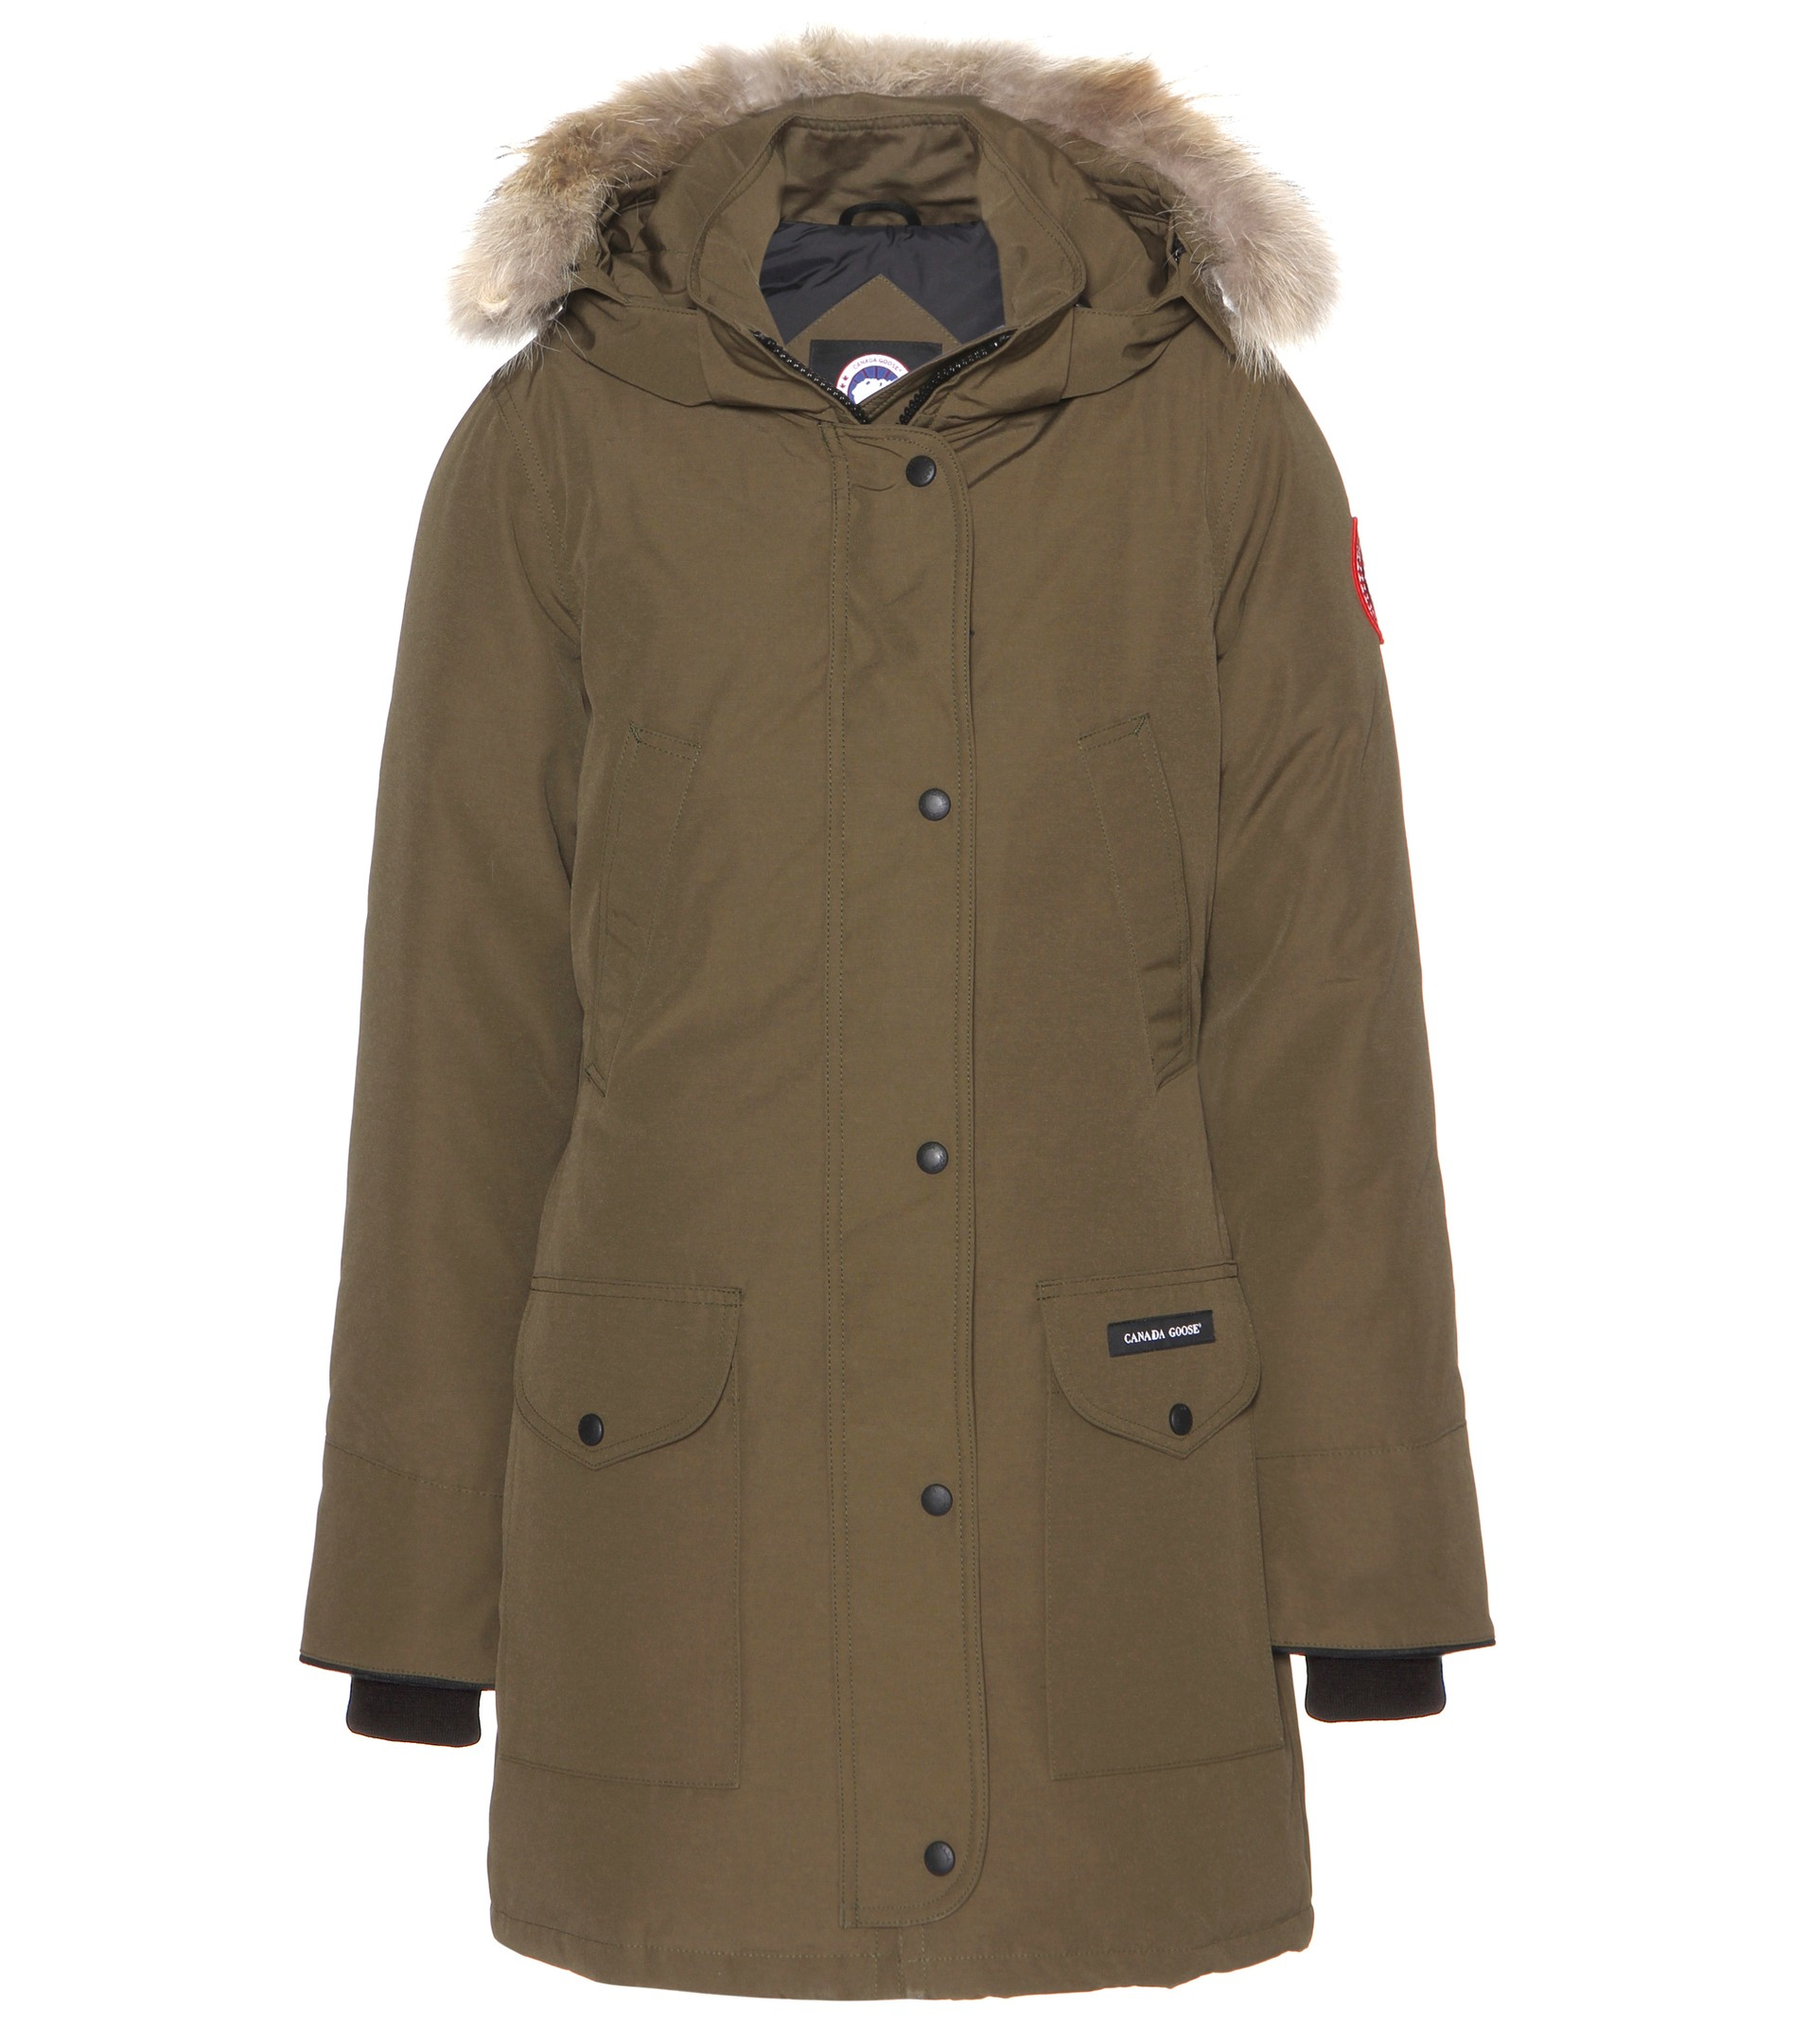 Canada Goose jackets sale official - Canada goose Trillium Down Jacket With Fur-trimmed Hood in Green ...